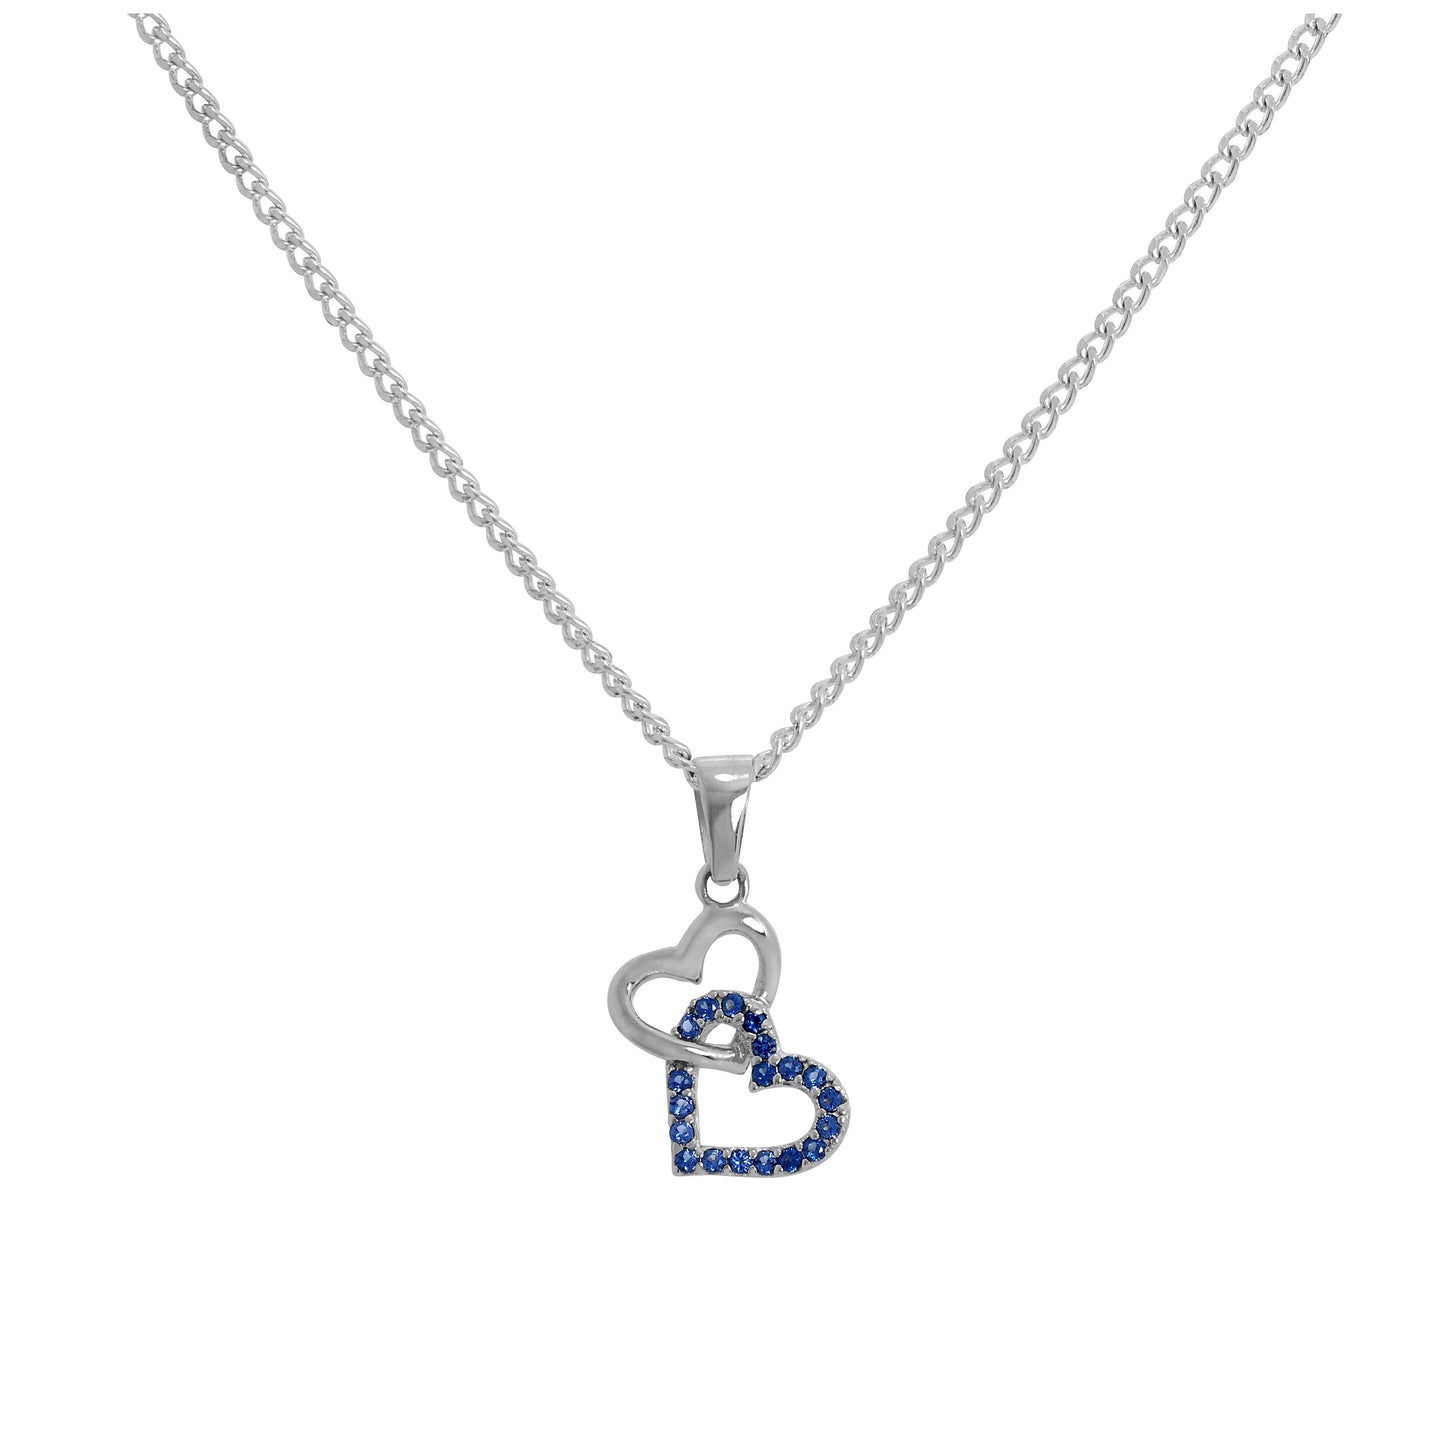 Sterling Silver & Blue CZ Crystal Entwined Hearts Pendant Necklace 16 - 24 Inches